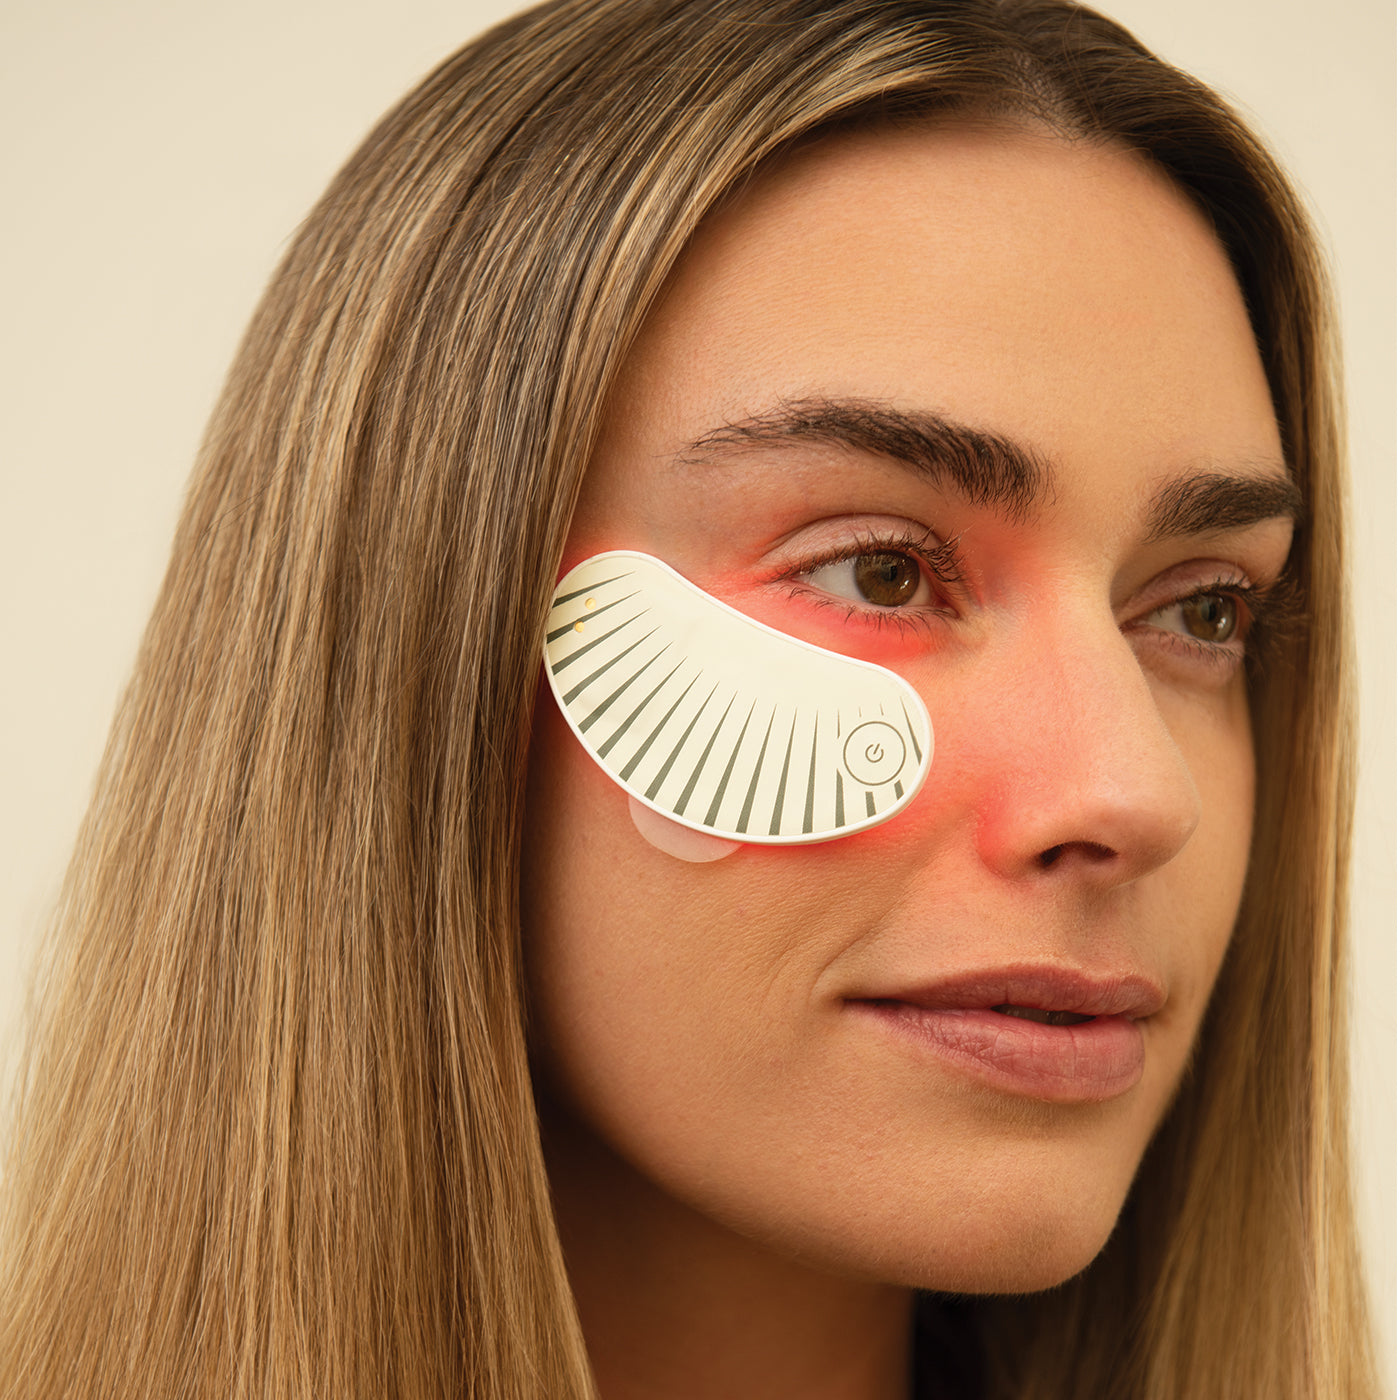 DR SABRINA™ EYE REGENERATE LED MASK + FREE HYDROCOLLOID PATCHES REFILL PACK